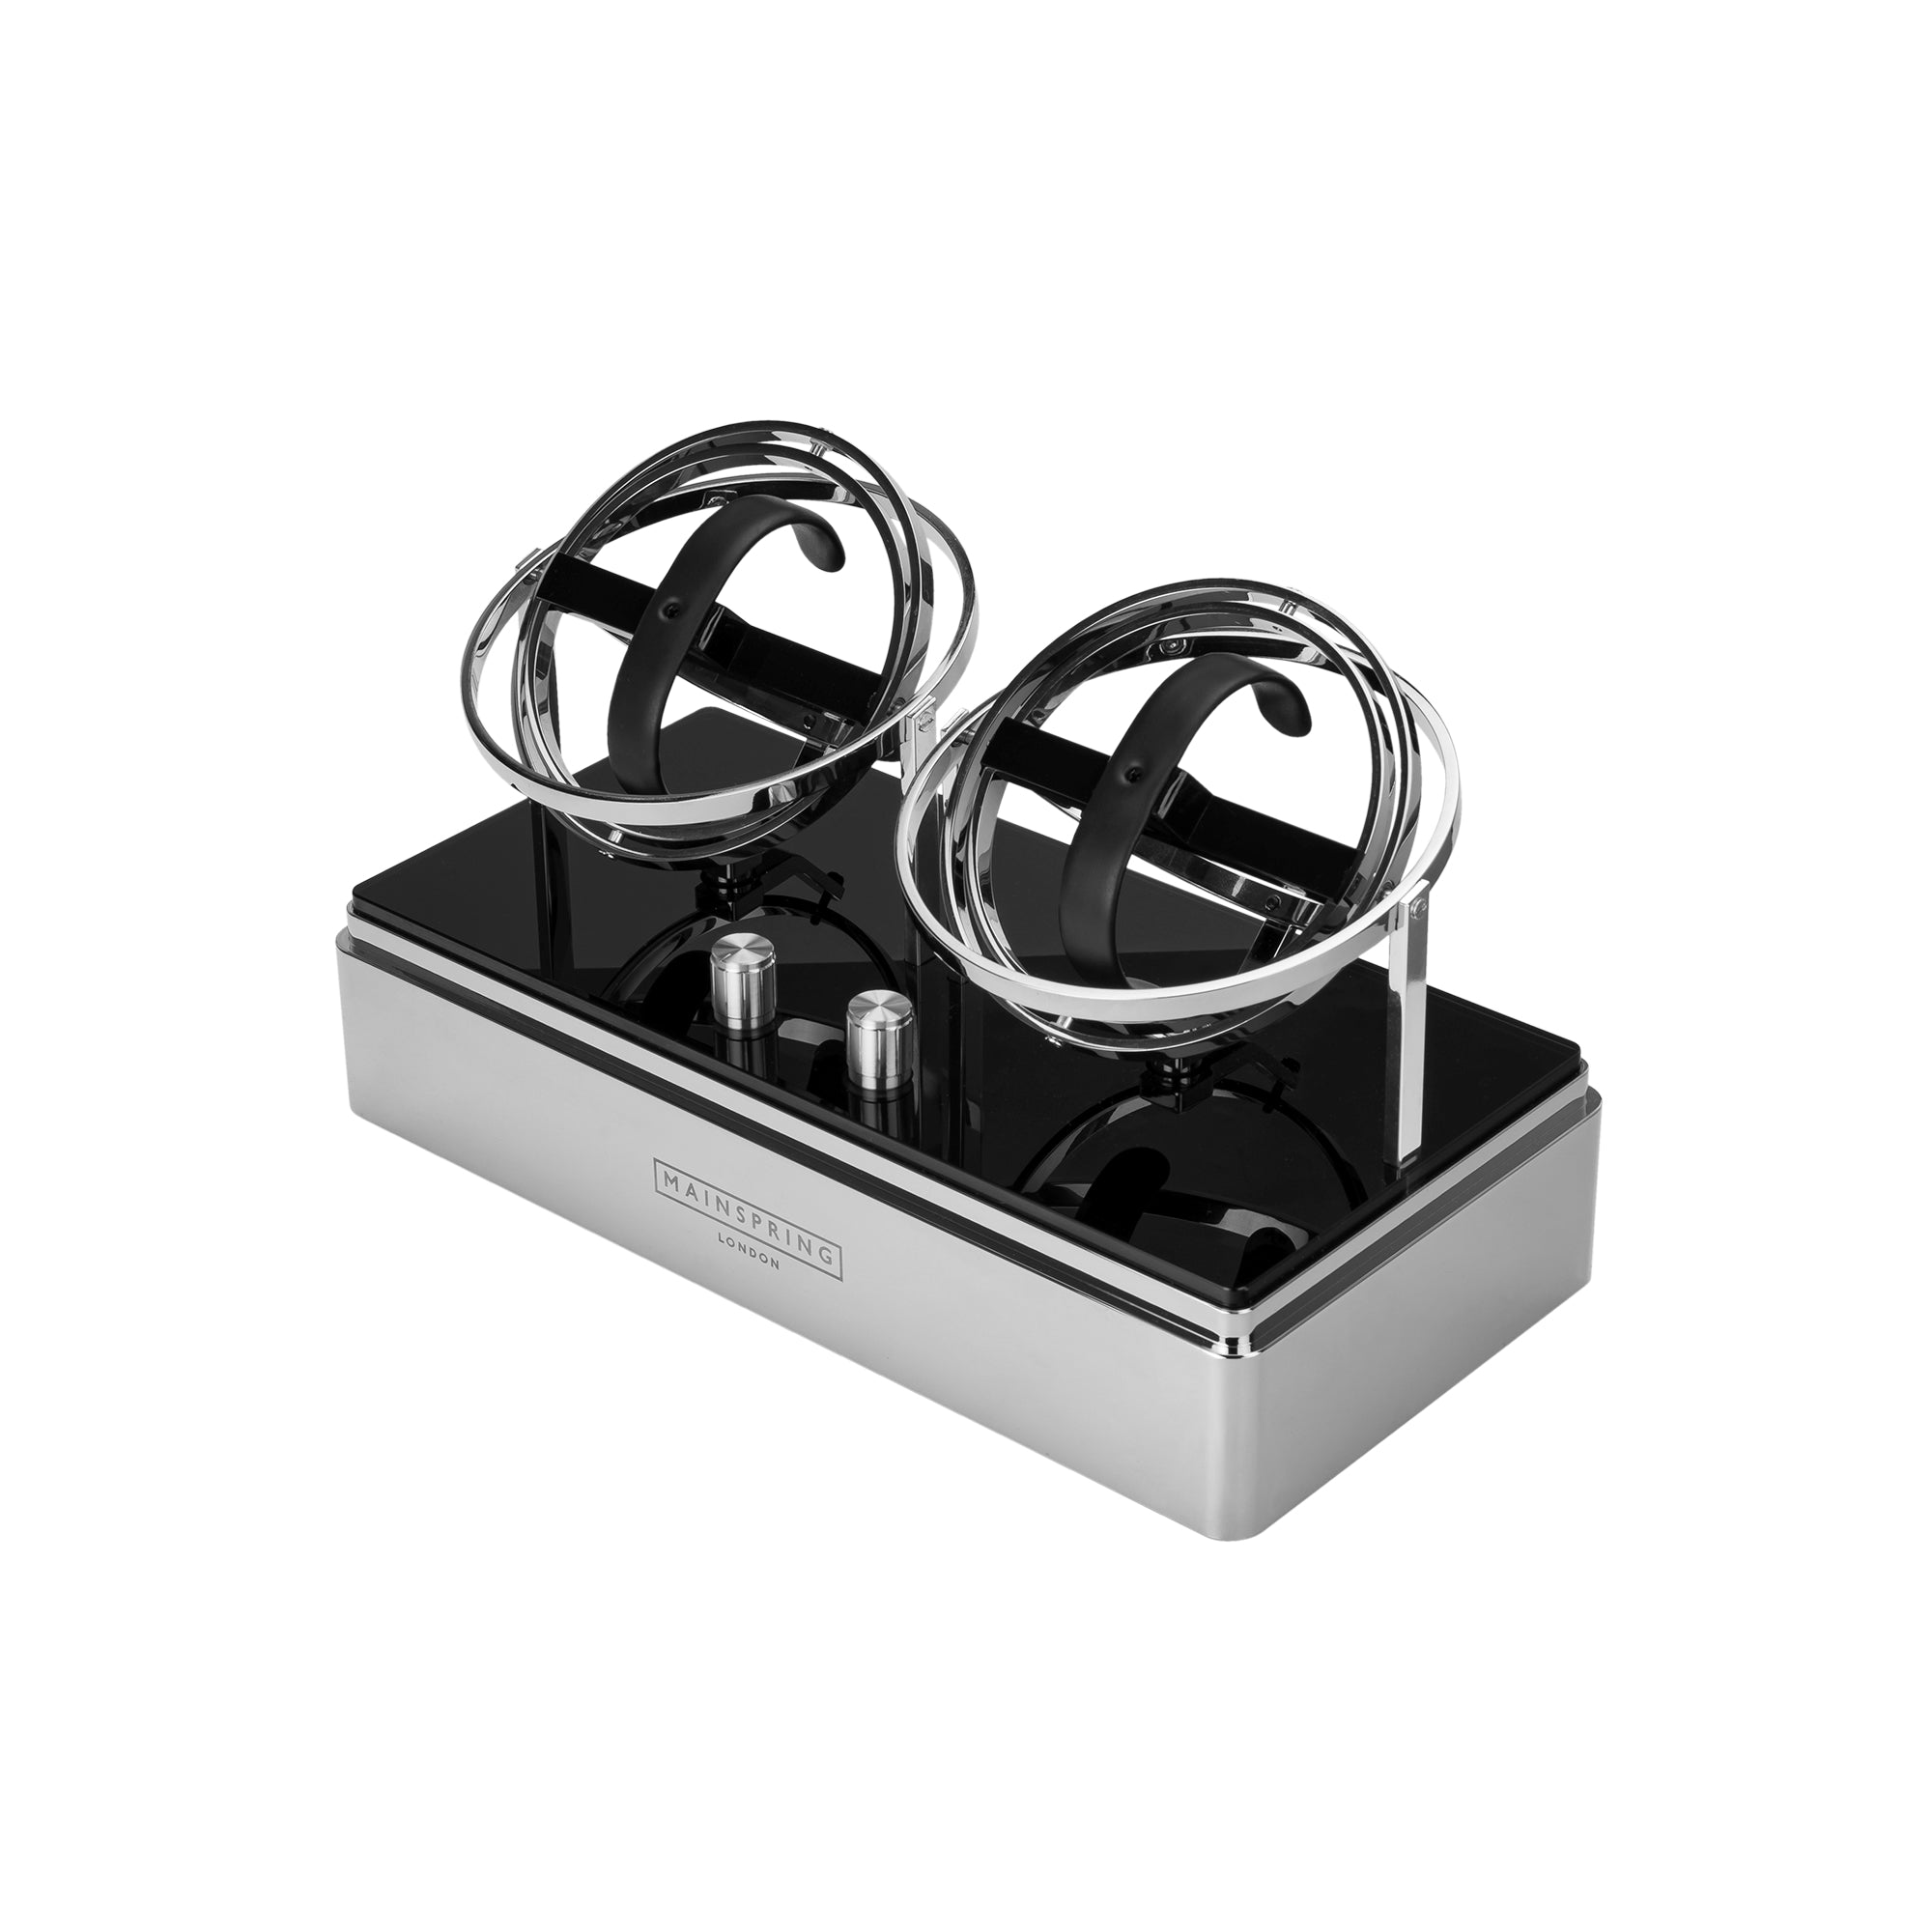 MAINSPRING Mainspring Astronomy Dualism Double Silver Watch Winder MS-WBOX1-01